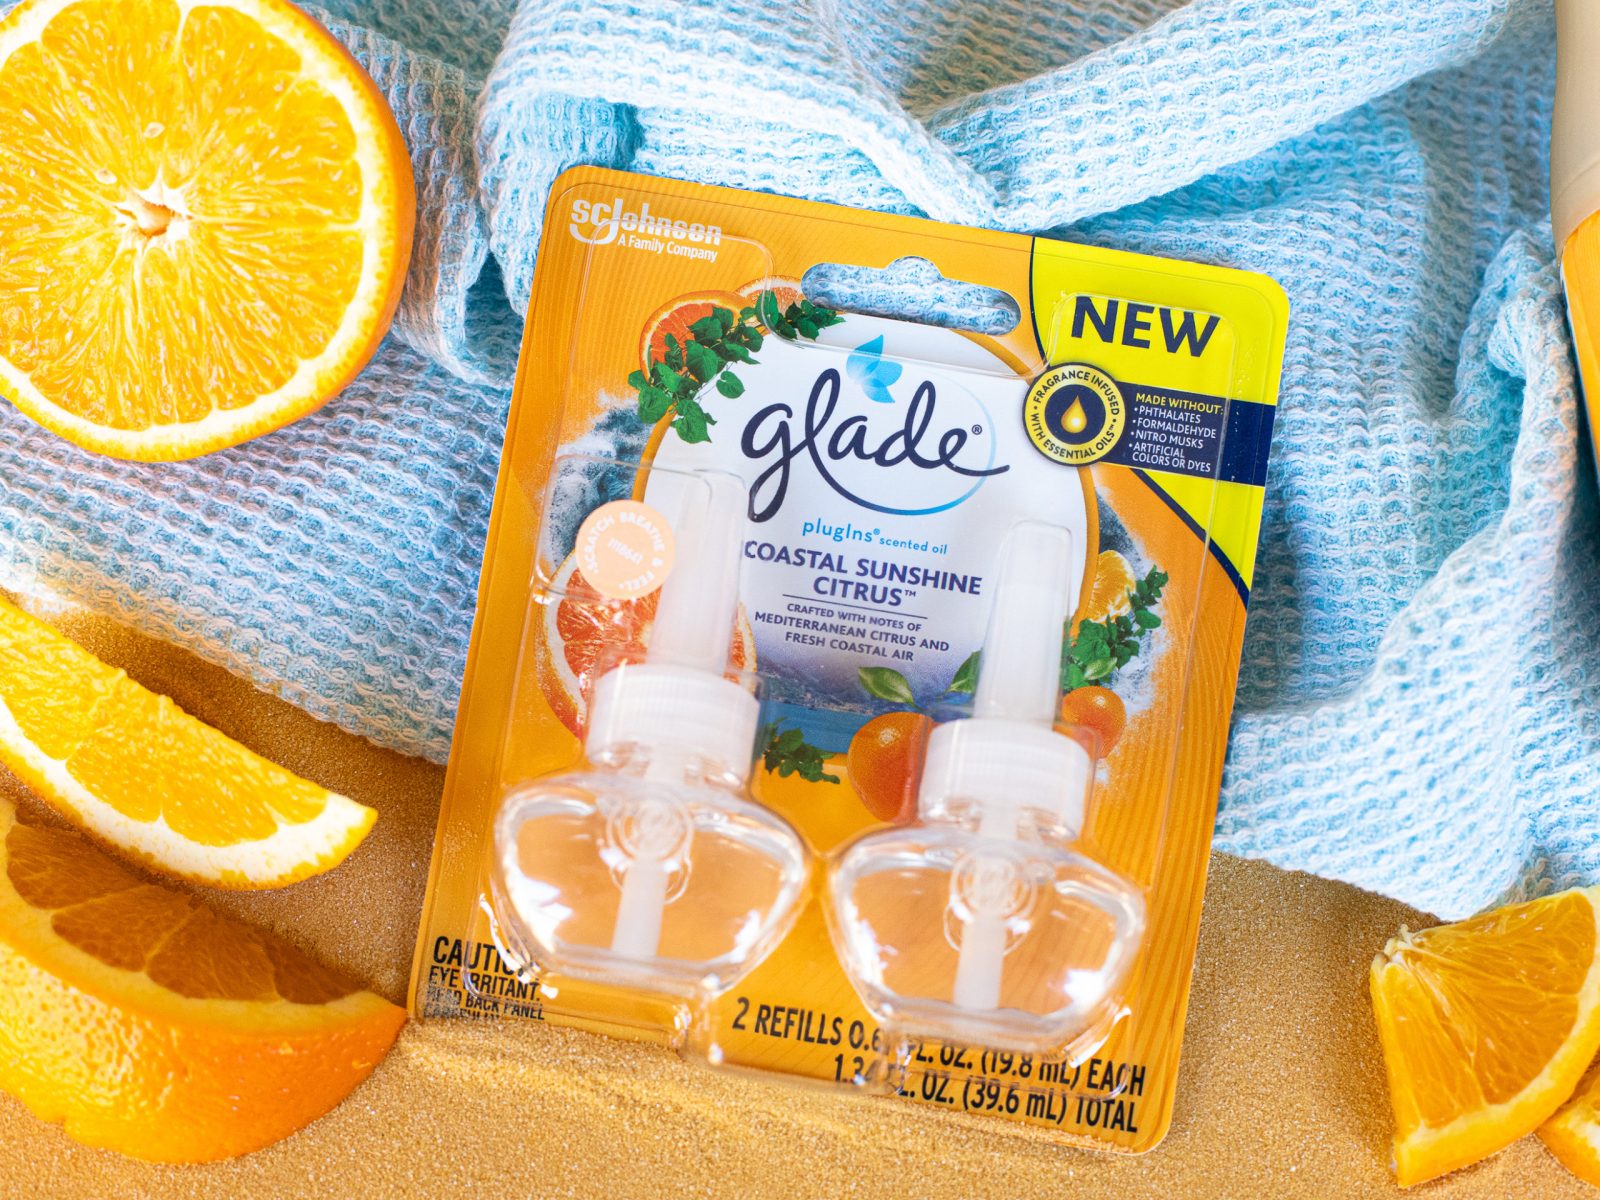 Bring The Feeling Of A Coastal Vacation To Your Home With NEW Glade® Coastal Sunshine Citrus Scent